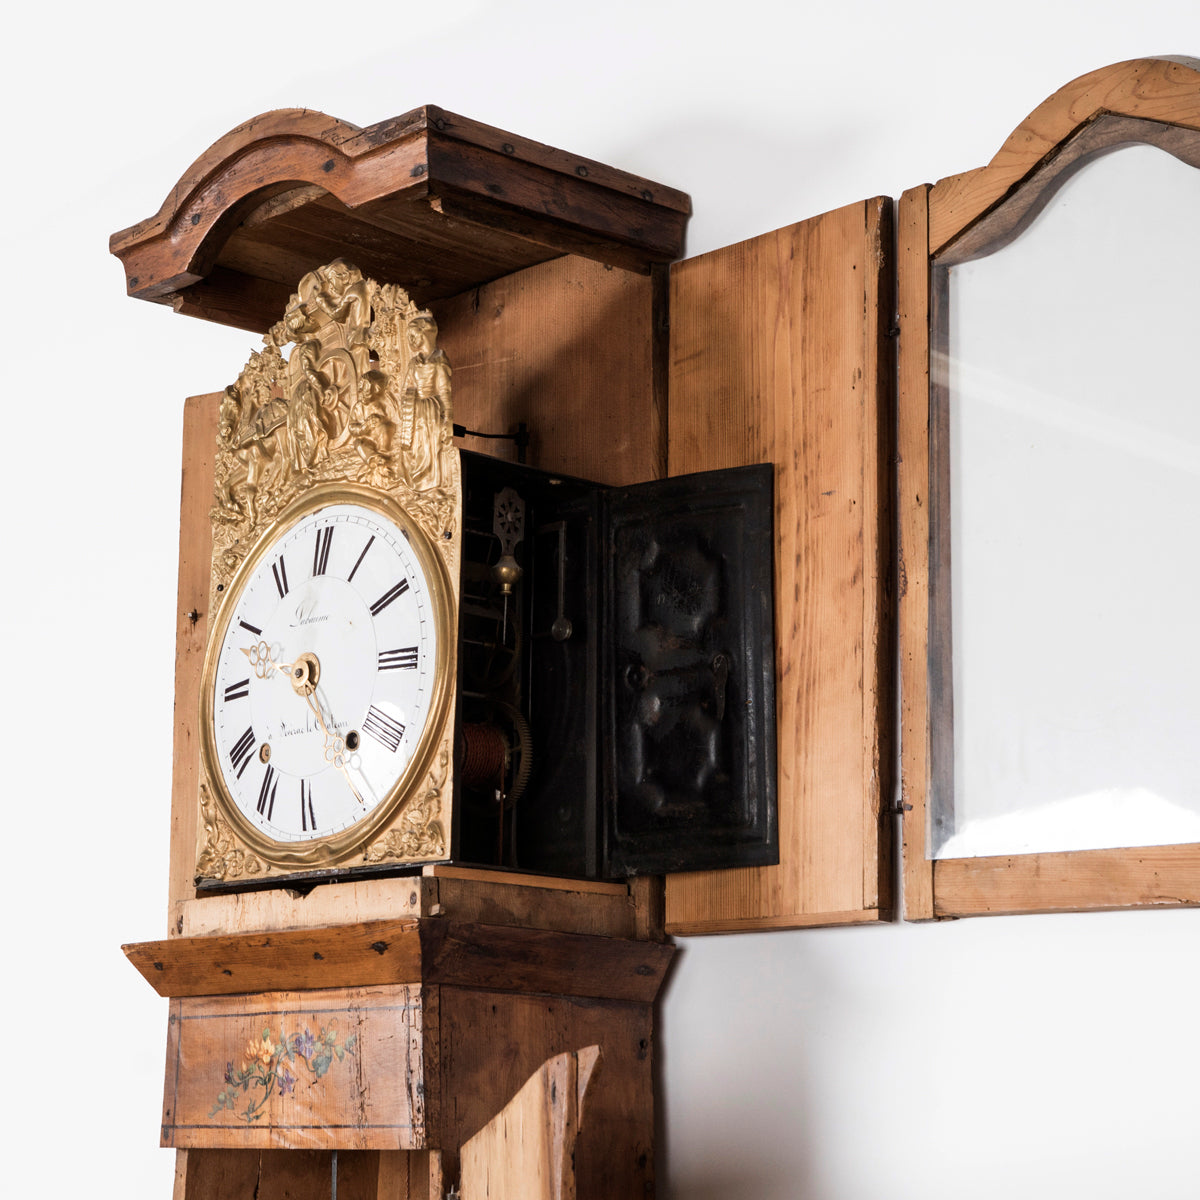 19th C Tall Case or Comtoise Clock